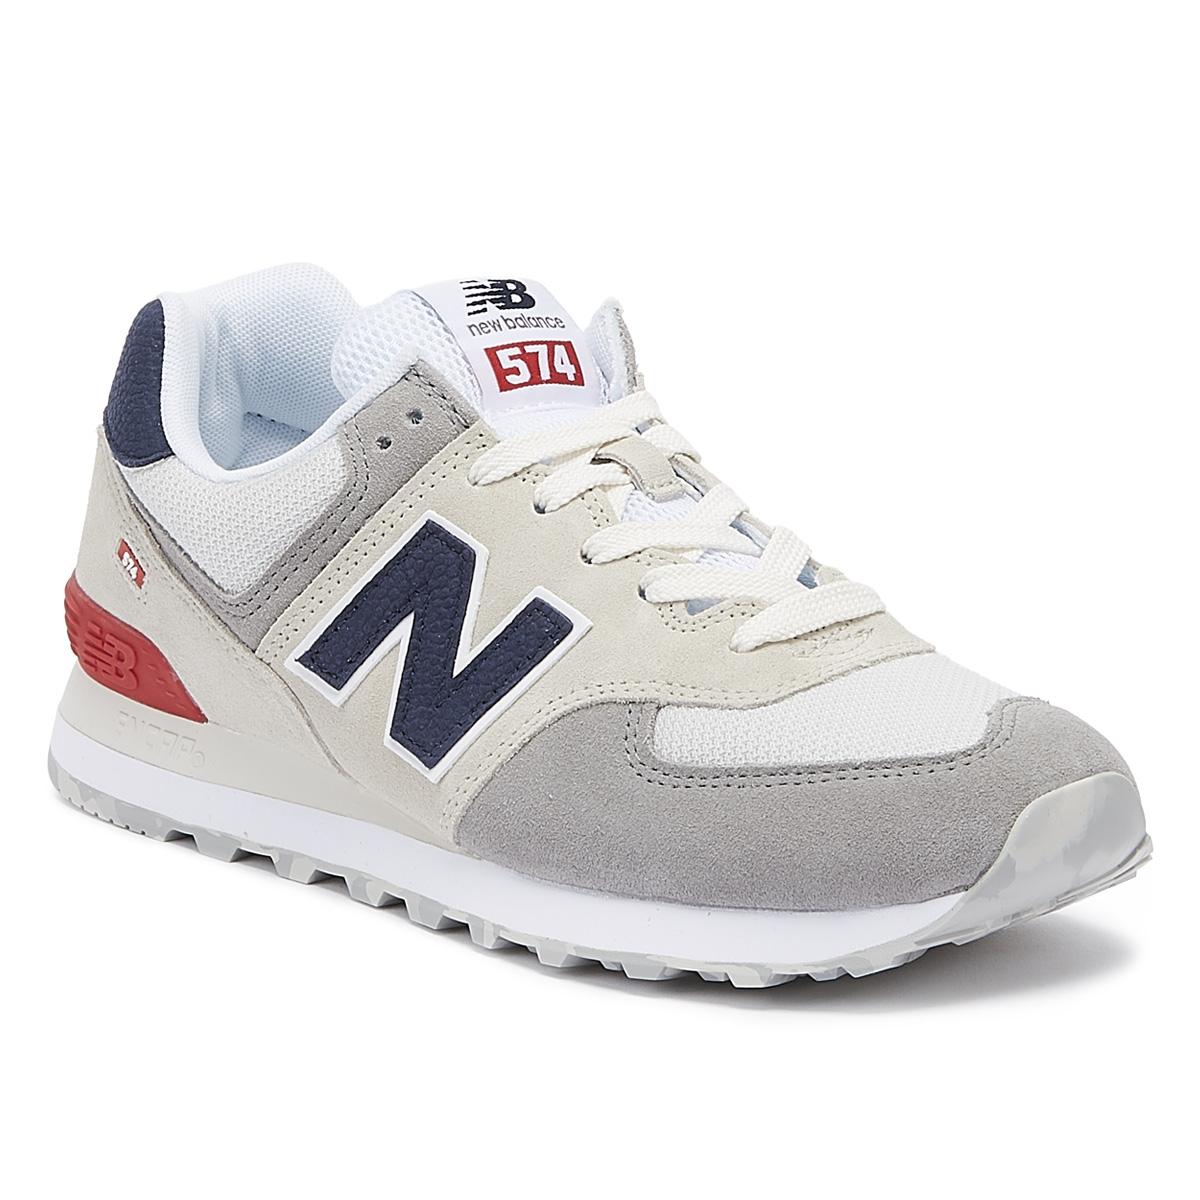 New Balance Suede 574 Mens Grey / Navy Trainers in Gray for Men - Lyst